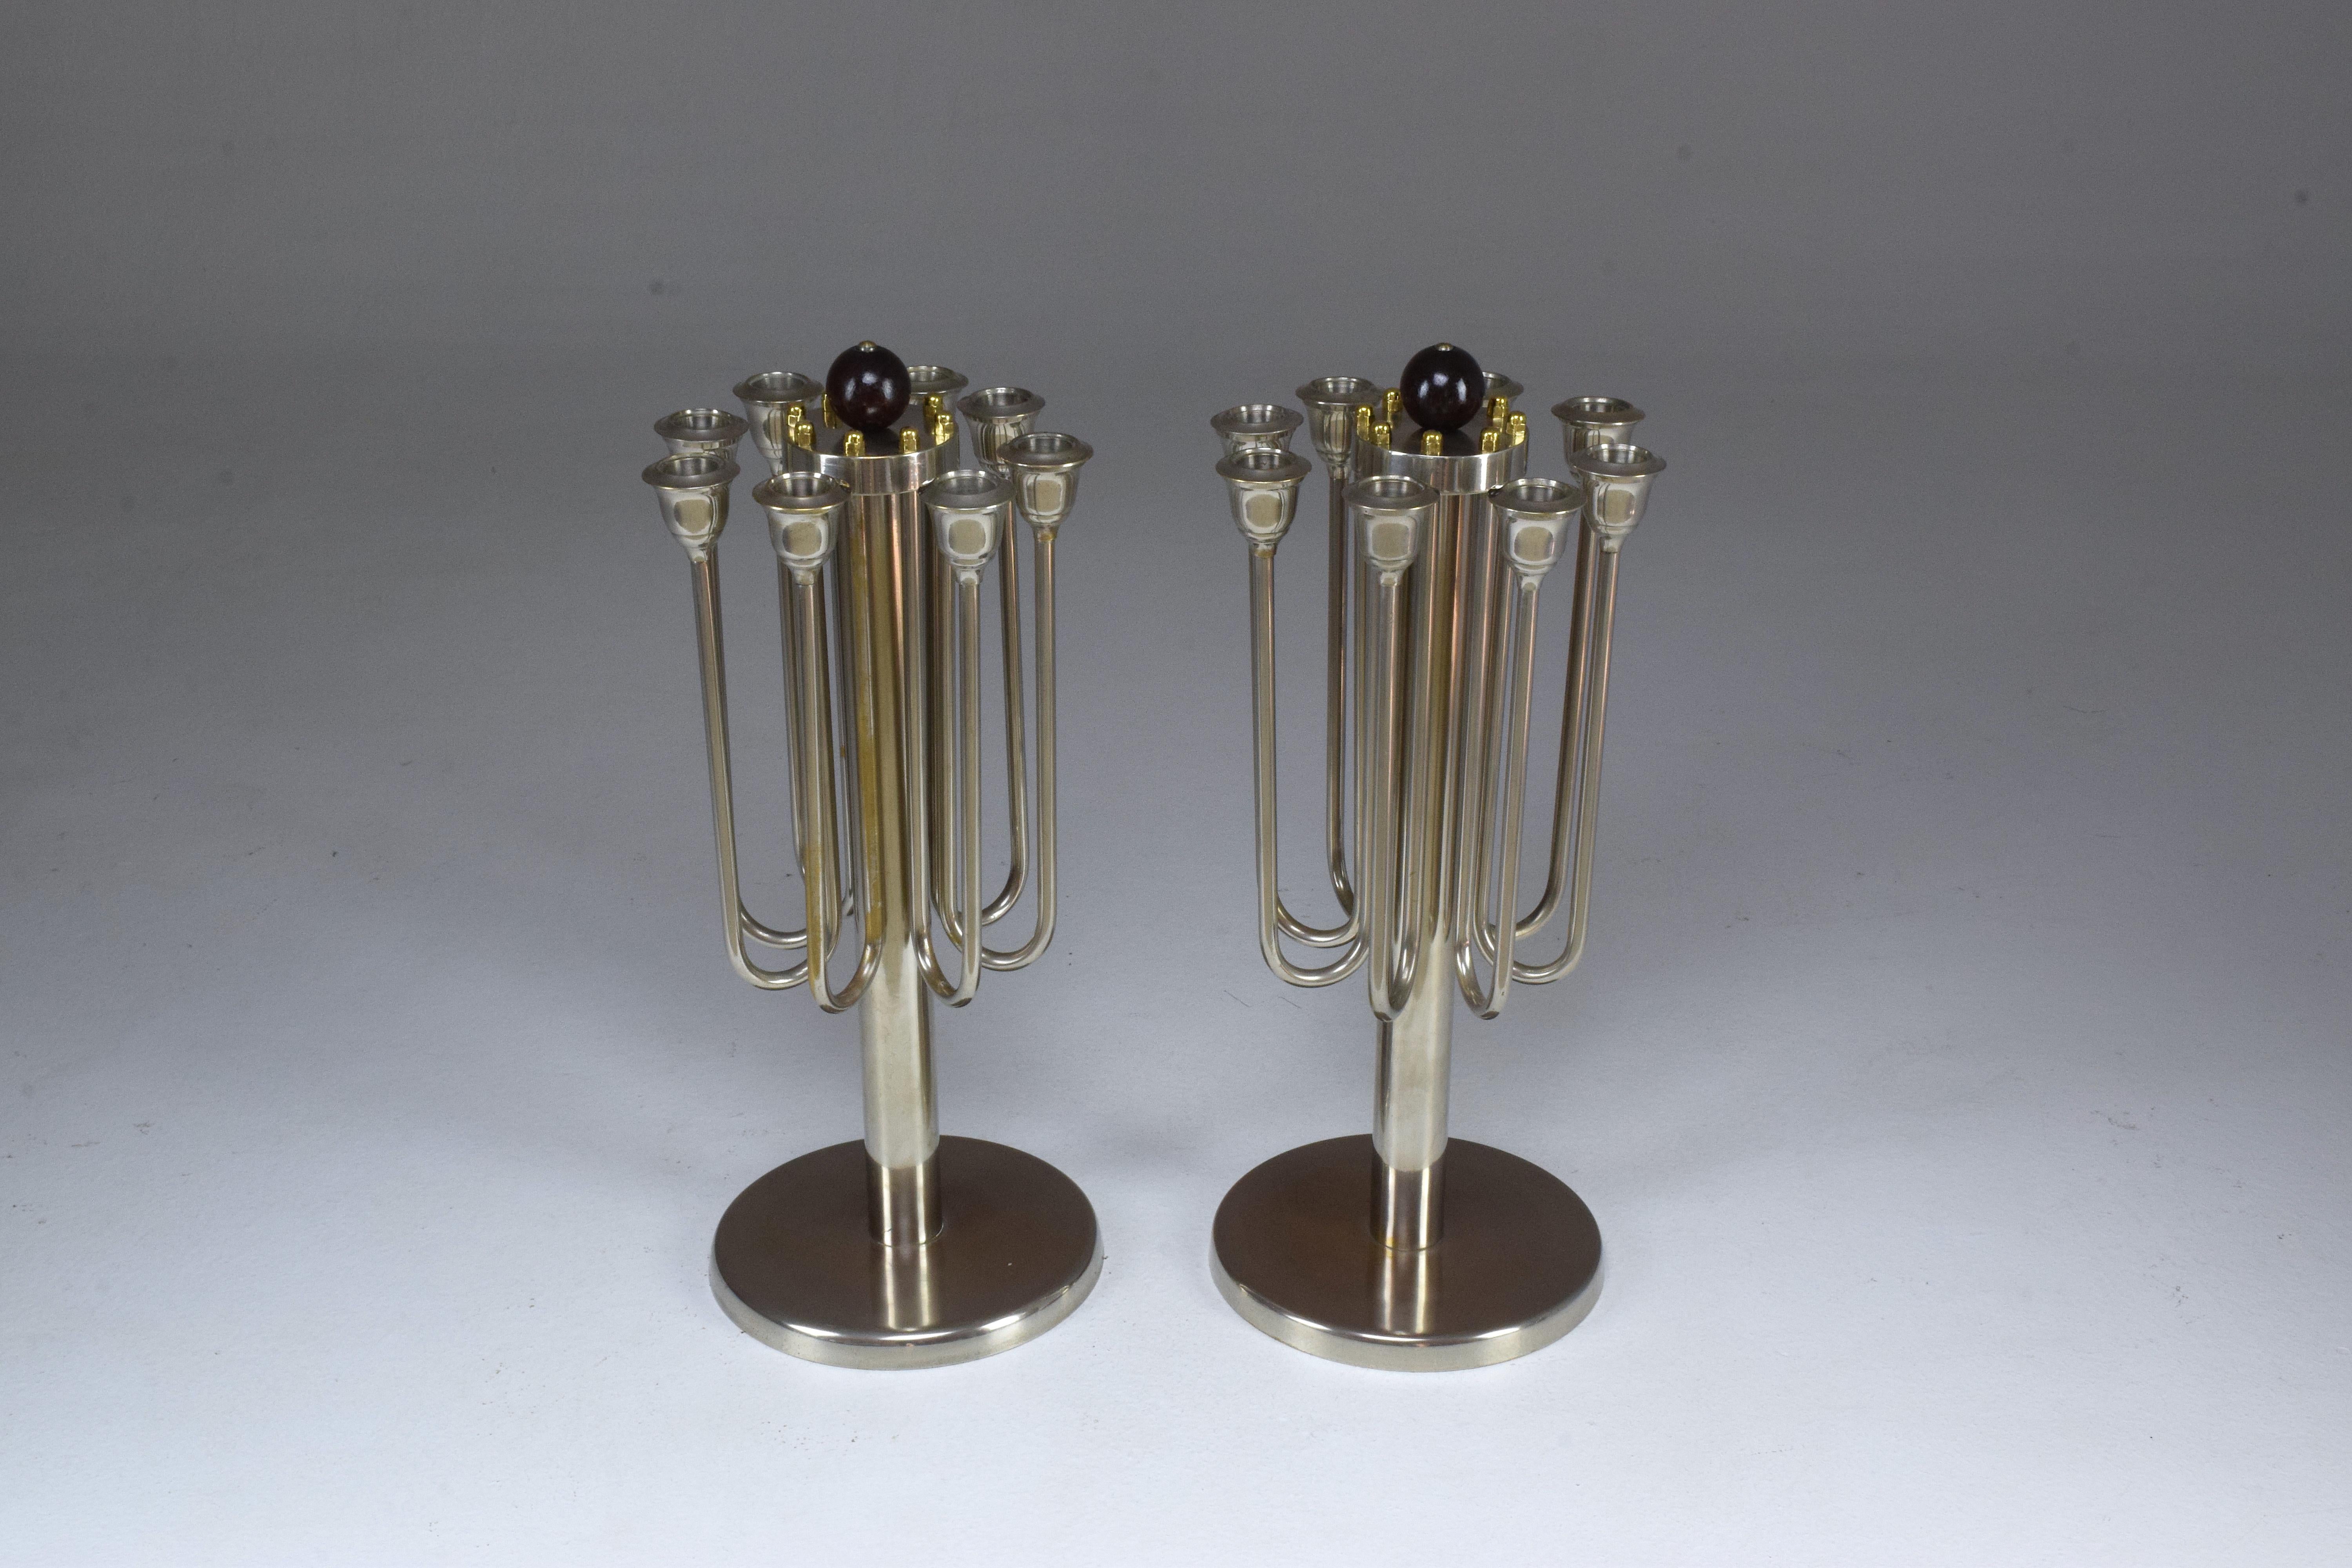 A stunning pair of 20th century vintage French Art Deco candleholders composed of nickel-plated brass, gold polished brass details and a wooden boule shaped details at the top. Each piece holds 8 candles. An elegant decorative addition to any home